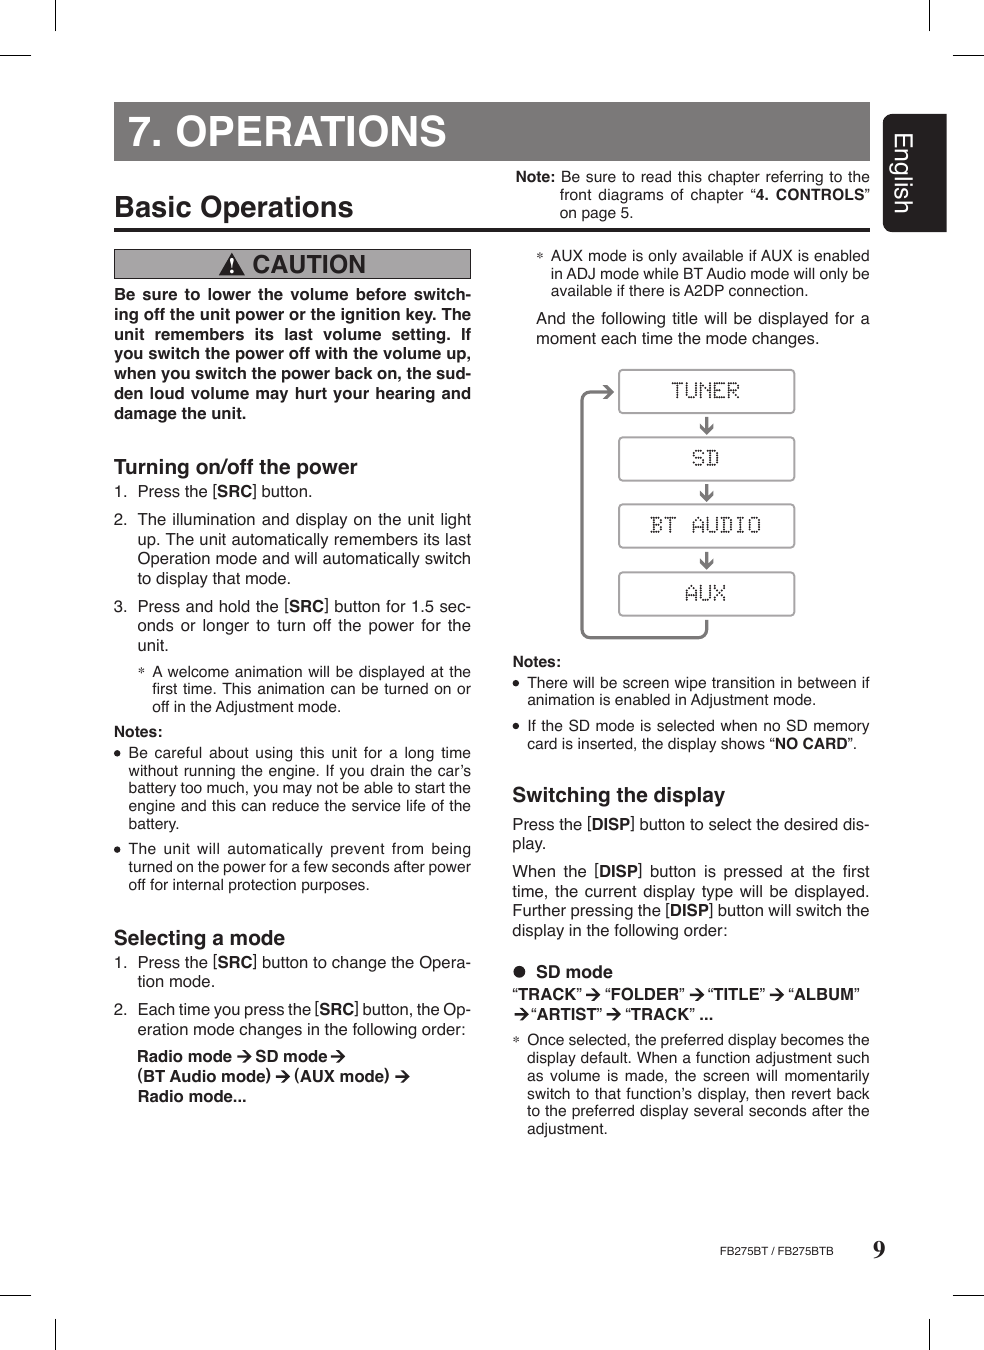 9EnglishFB275BT / FB275BTBNote: Be sure to read this chapter referring to the front  diagrams of  chapter  “4. CONTROLS” on page 5.7. OPERATIONS CAUTION !Basic OperationsBe  sure  to  lower  the  volume  before  switch-ing off the unit power or the ignition key. The unit  remembers  its  last  volume  setting.  If you switch the power off with the volume up, when you switch the power back on, the sud-den loud volume may hurt your hearing and damage the unit. Turning on/off the power1.  Press the [SRC] button.2.  The illumination and display on the unit light up. The unit automatically remembers its last Operation mode and will automatically switch to display that mode.3.  Press and hold the [SRC] button for 1.5 sec-onds  or  longer  to  turn  off  the  power  for  the unit.∗  A welcome animation will be displayed at the ﬁrst time. This animation can be turned on or off in the Adjustment mode.Notes:  Be  careful  about  using  this  unit  for  a  long  time without running the engine. If you drain the carʼs battery too much, you may not be able to start the engine and this can reduce the service life of the battery.  The unit  will  automatically prevent  from  being turned on the power for a few seconds after power off for internal protection purposes. Selecting a mode1.  Press the [SRC] button to change the Opera-tion mode.2.  Each time you press the [SRC] button, the Op-eration mode changes in the following order:  Radio mode     SD mode         (BT Audio mode)     (AUX mode)      Radio mode...Switching the displayPress the [DISP] button to select the desired dis-play.When  the  [DISP]  button  is  pressed  at  the  ﬁrst time, the  current display  type will be  displayed. Further pressing the [DISP] button will switch the display in the following order:Notes:  There will be screen wipe transition in between if animation is enabled in Adjustment mode.  If the SD mode is selected when no SD memory card is inserted, the display shows “NO CARD”.  SD mode“TRACK”     “FOLDER”     “TITLE”     “ALBUM”          “ARTIST”     “TRACK” ... ∗  Once selected, the preferred display becomes the display default. When a function adjustment such as  volume is  made,  the screen  will  momentarily switch to that functionʼs display, then revert back to the preferred display several seconds after the adjustment.∗ AUX mode is only available if AUX is enabled in ADJ mode while BT Audio mode will only be available if there is A2DP connection.  And the following title will be displayed for a moment each time the mode changes.